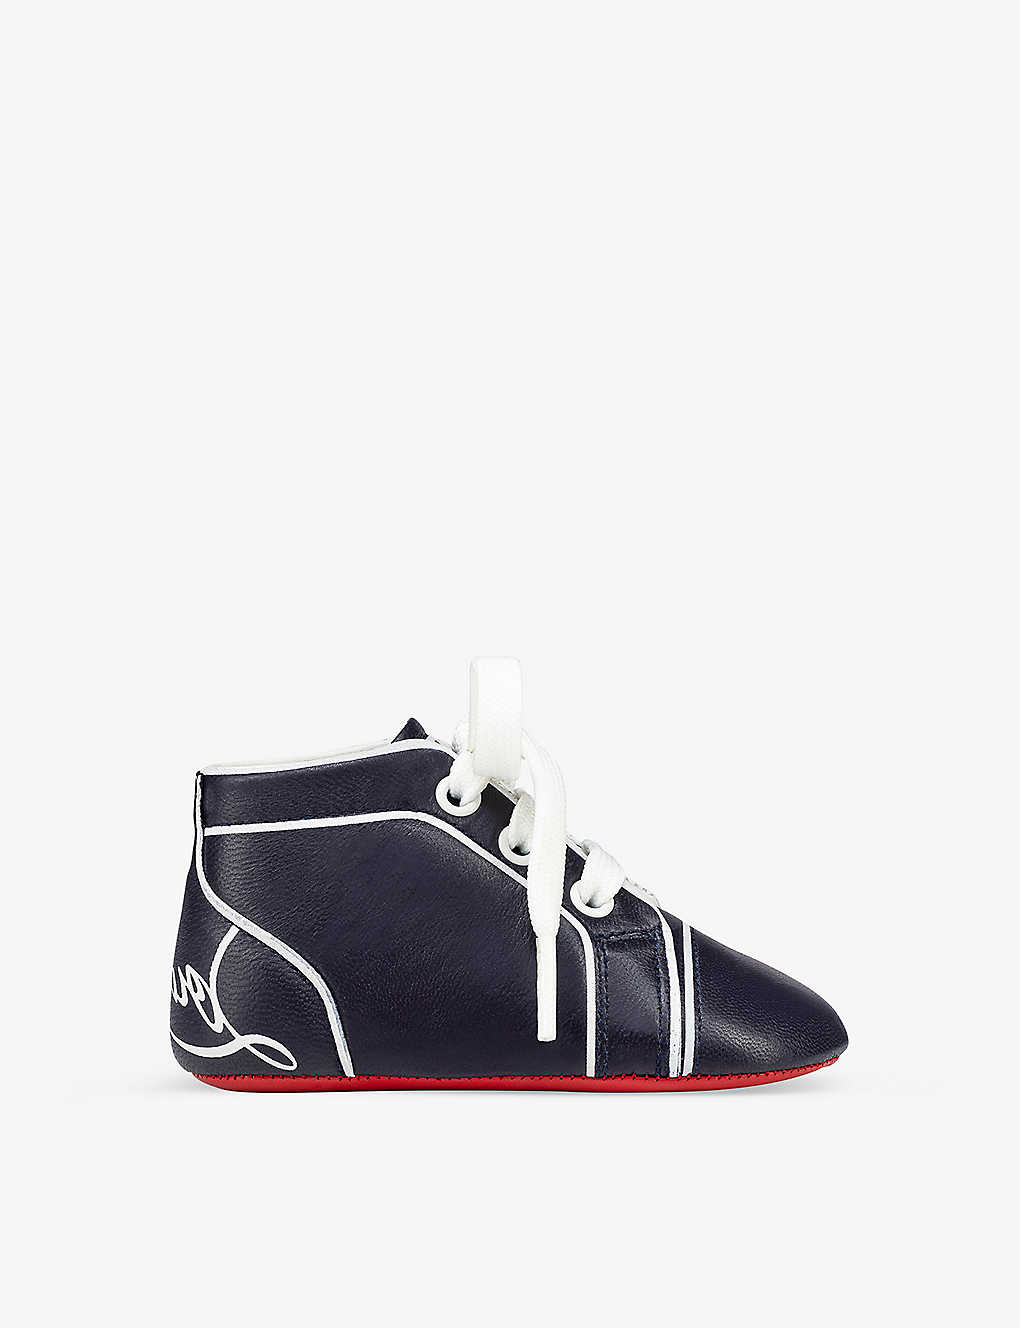 Shop Christian Louboutin Navy Baby Funnyto Logo-print Leather High-top Crib Shoes 0-12 Months